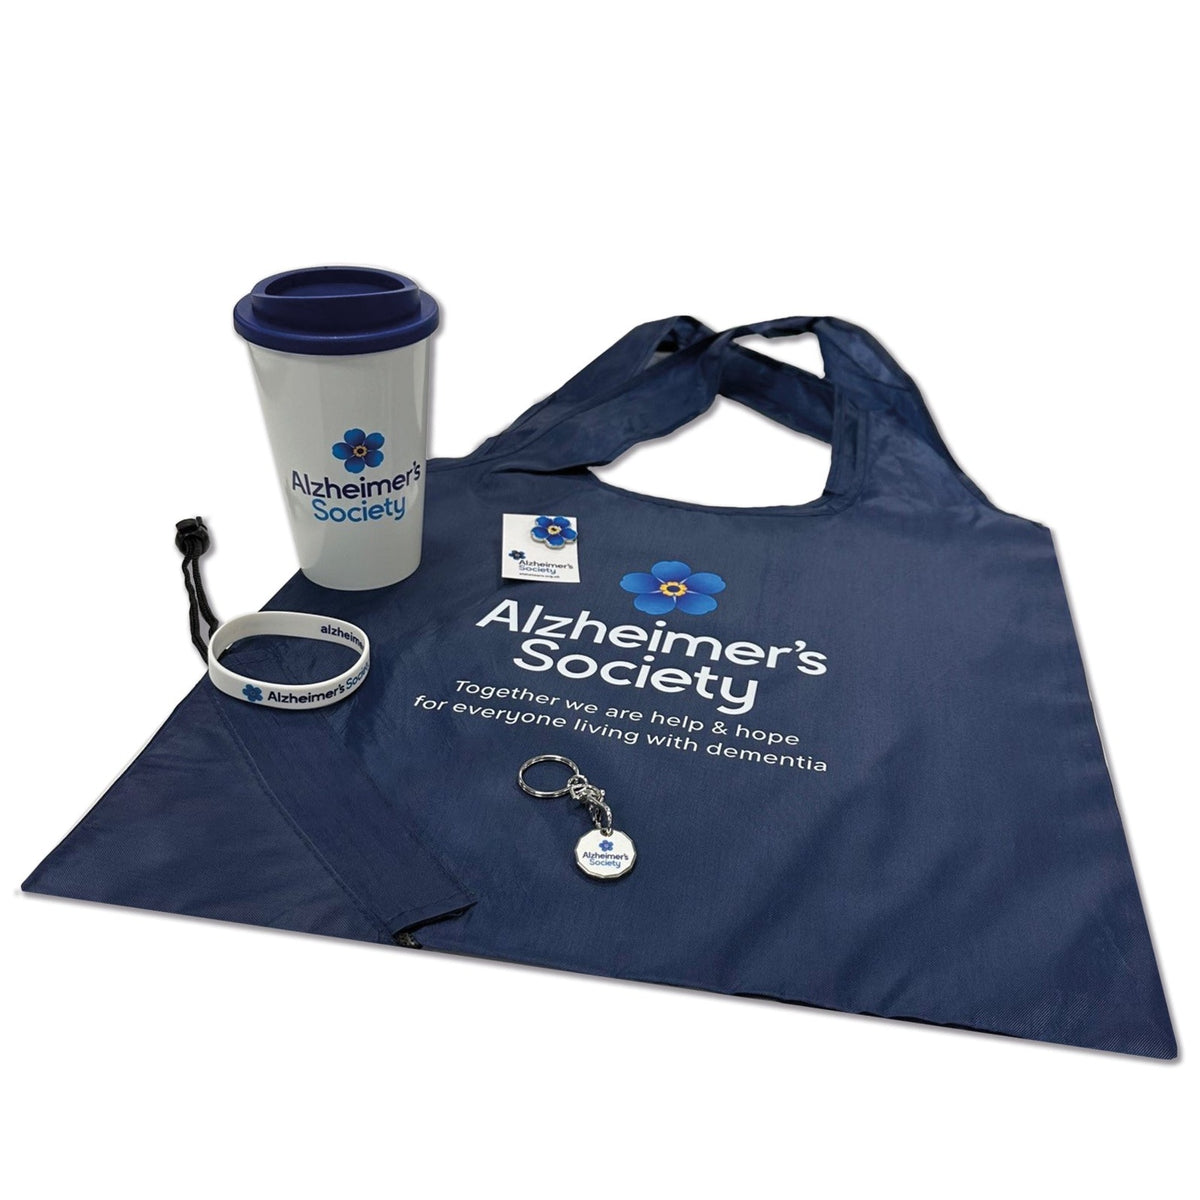 A bundle of Alzheimer&#39;s Society branded bestsellers which include a enamelled blue pin badge, white wristband, metal trolley token keyring, white travel cup with blue lid and a blue shopper which tucks into its own drawstring bag. All branded with the Alzheimer&#39;s forget-me-not logo and charity name.